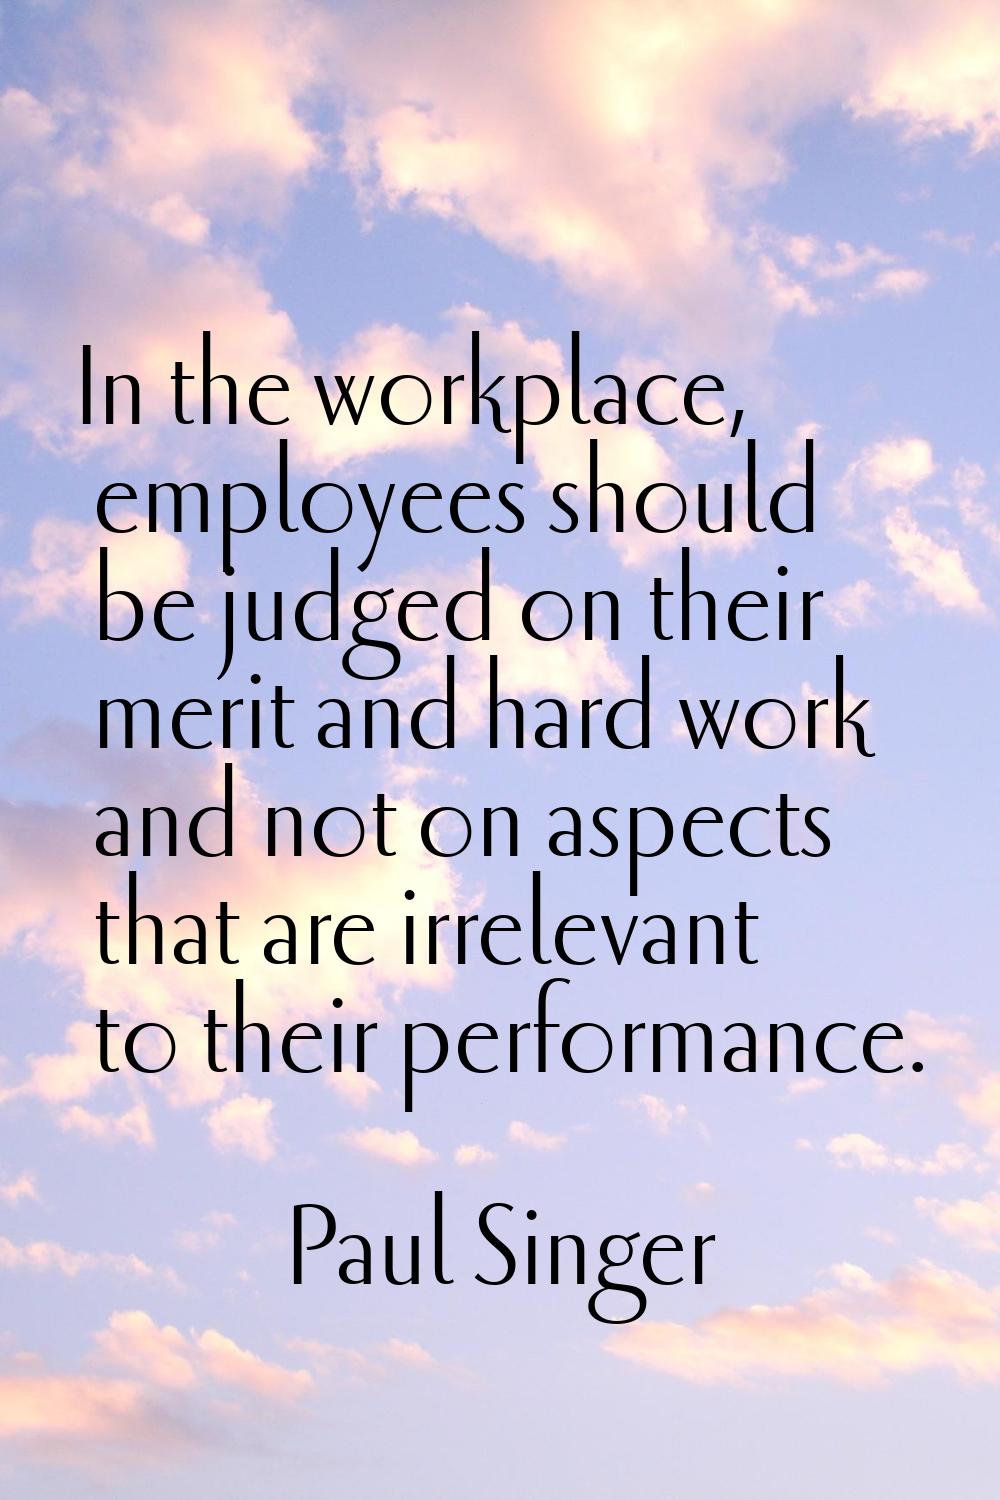 In the workplace, employees should be judged on their merit and hard work and not on aspects that a